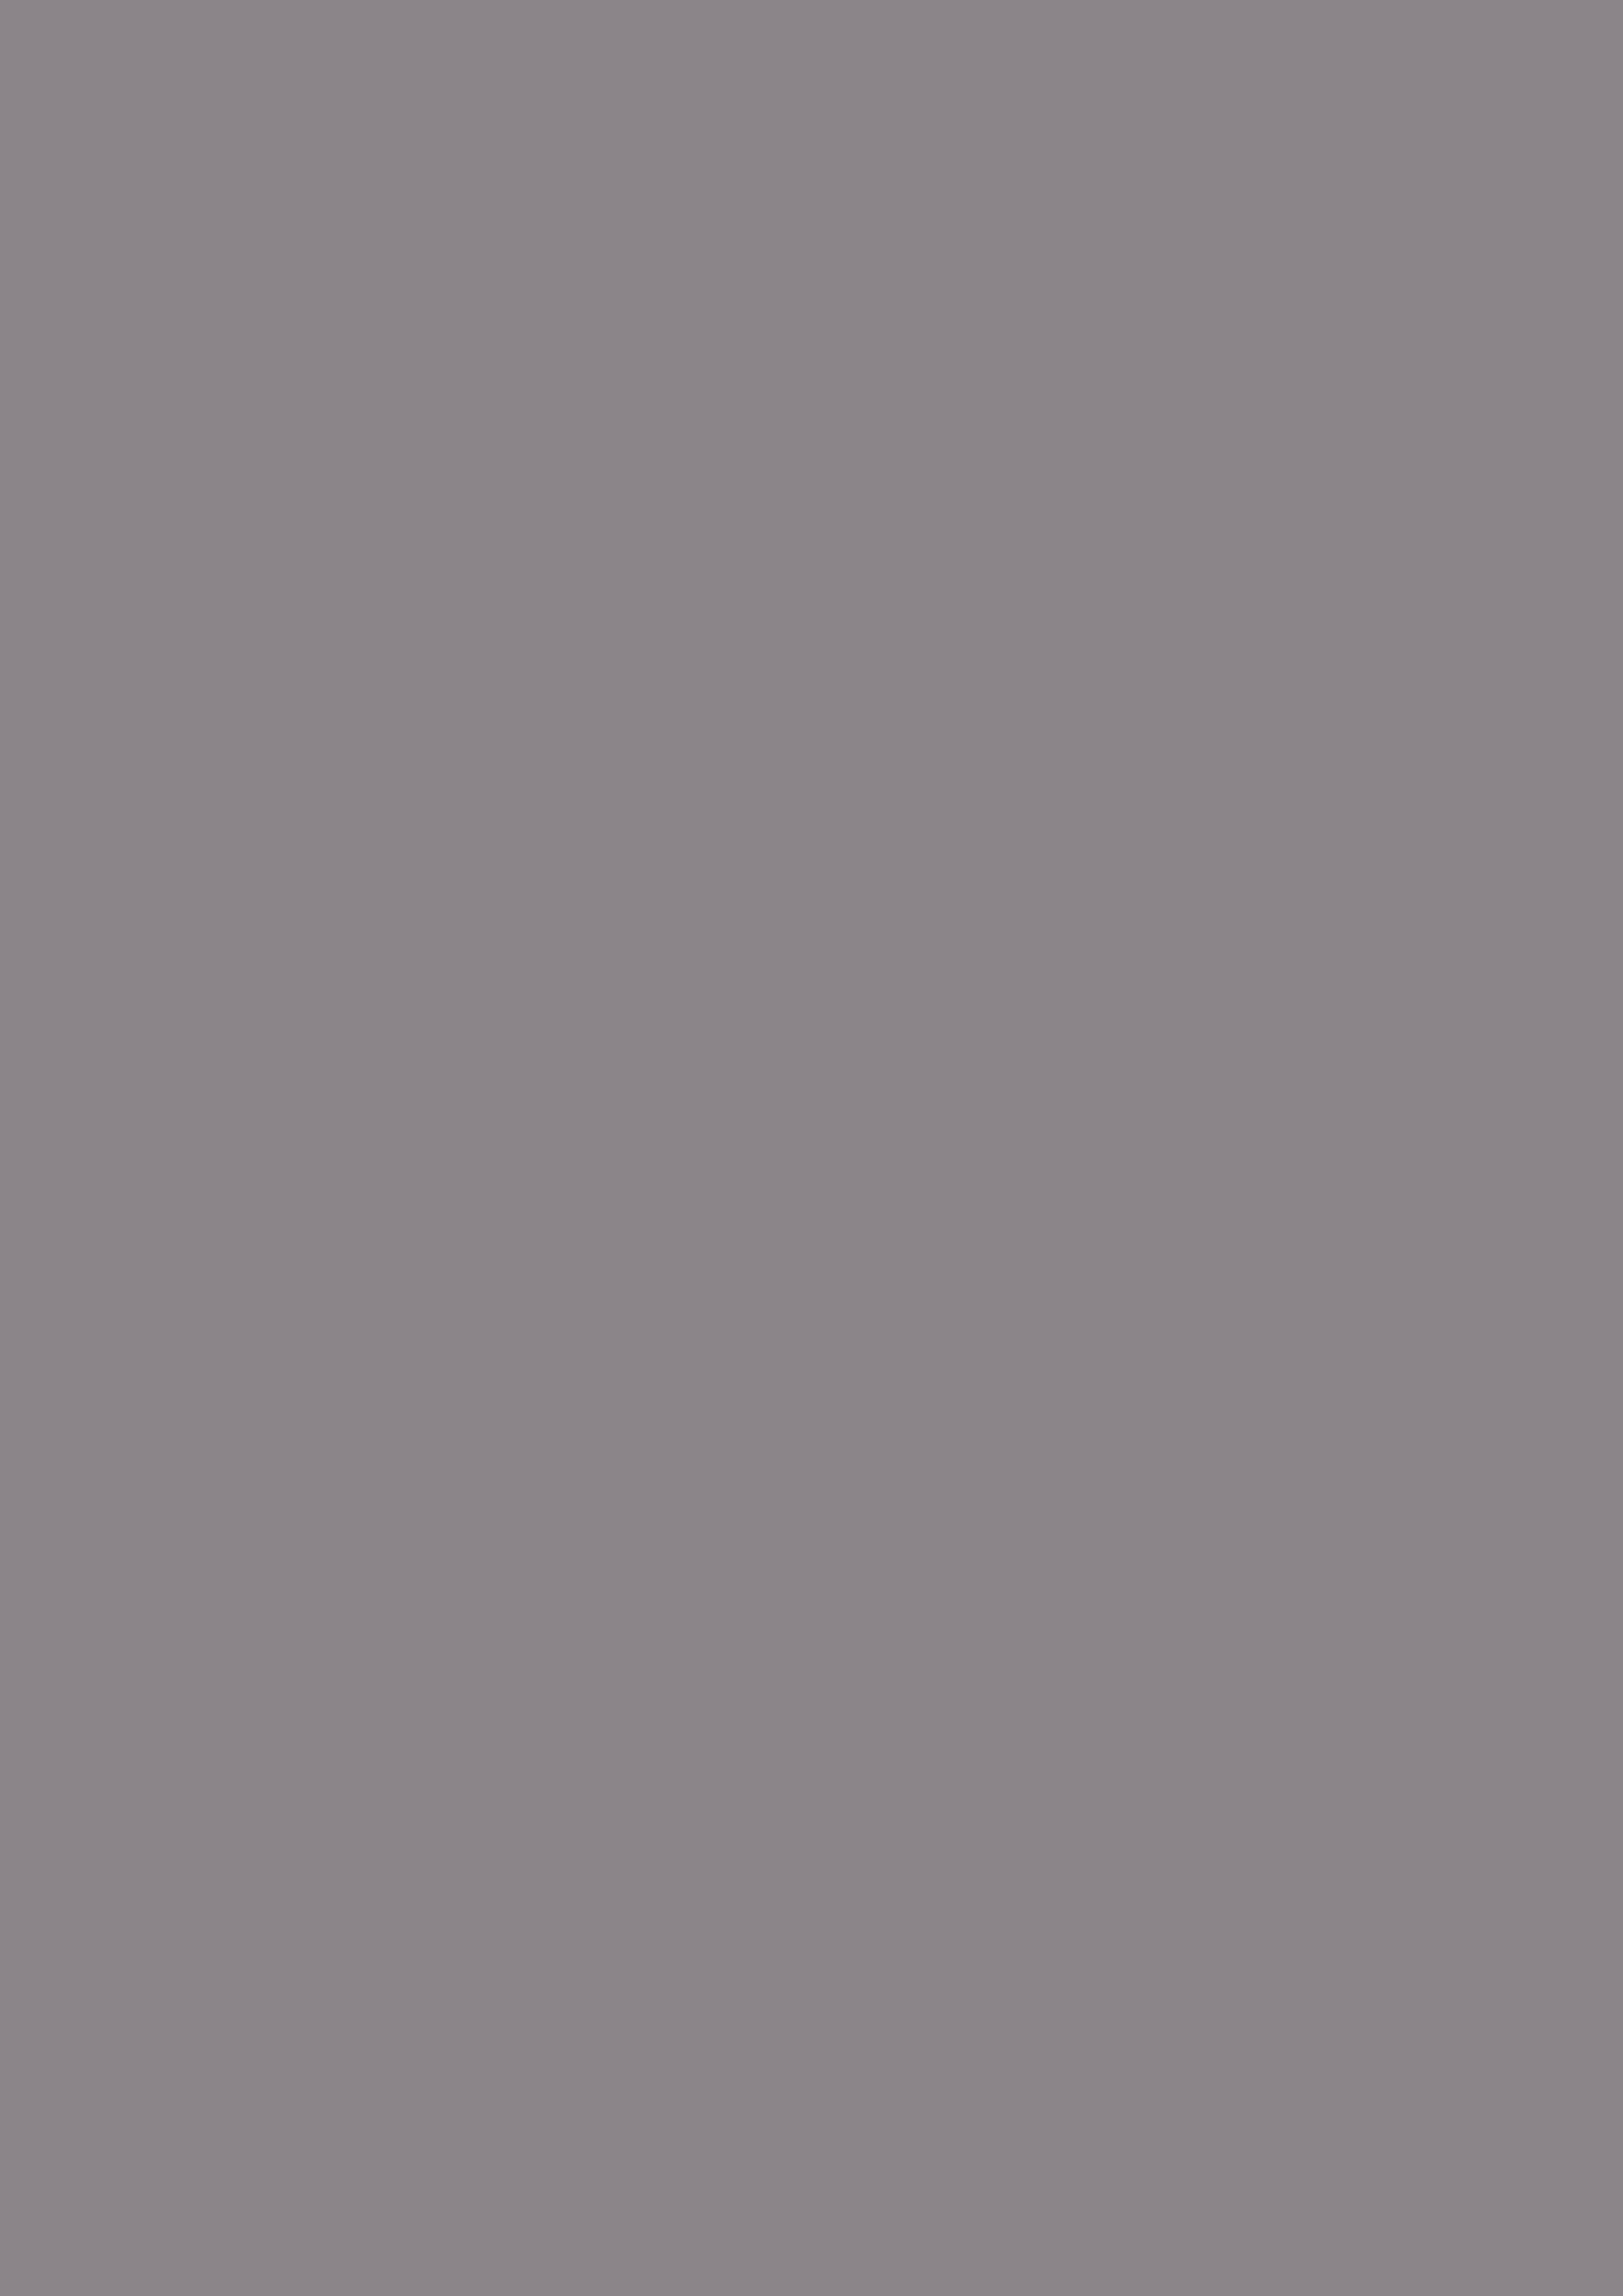 2480x3508 Taupe Gray Solid Color Background